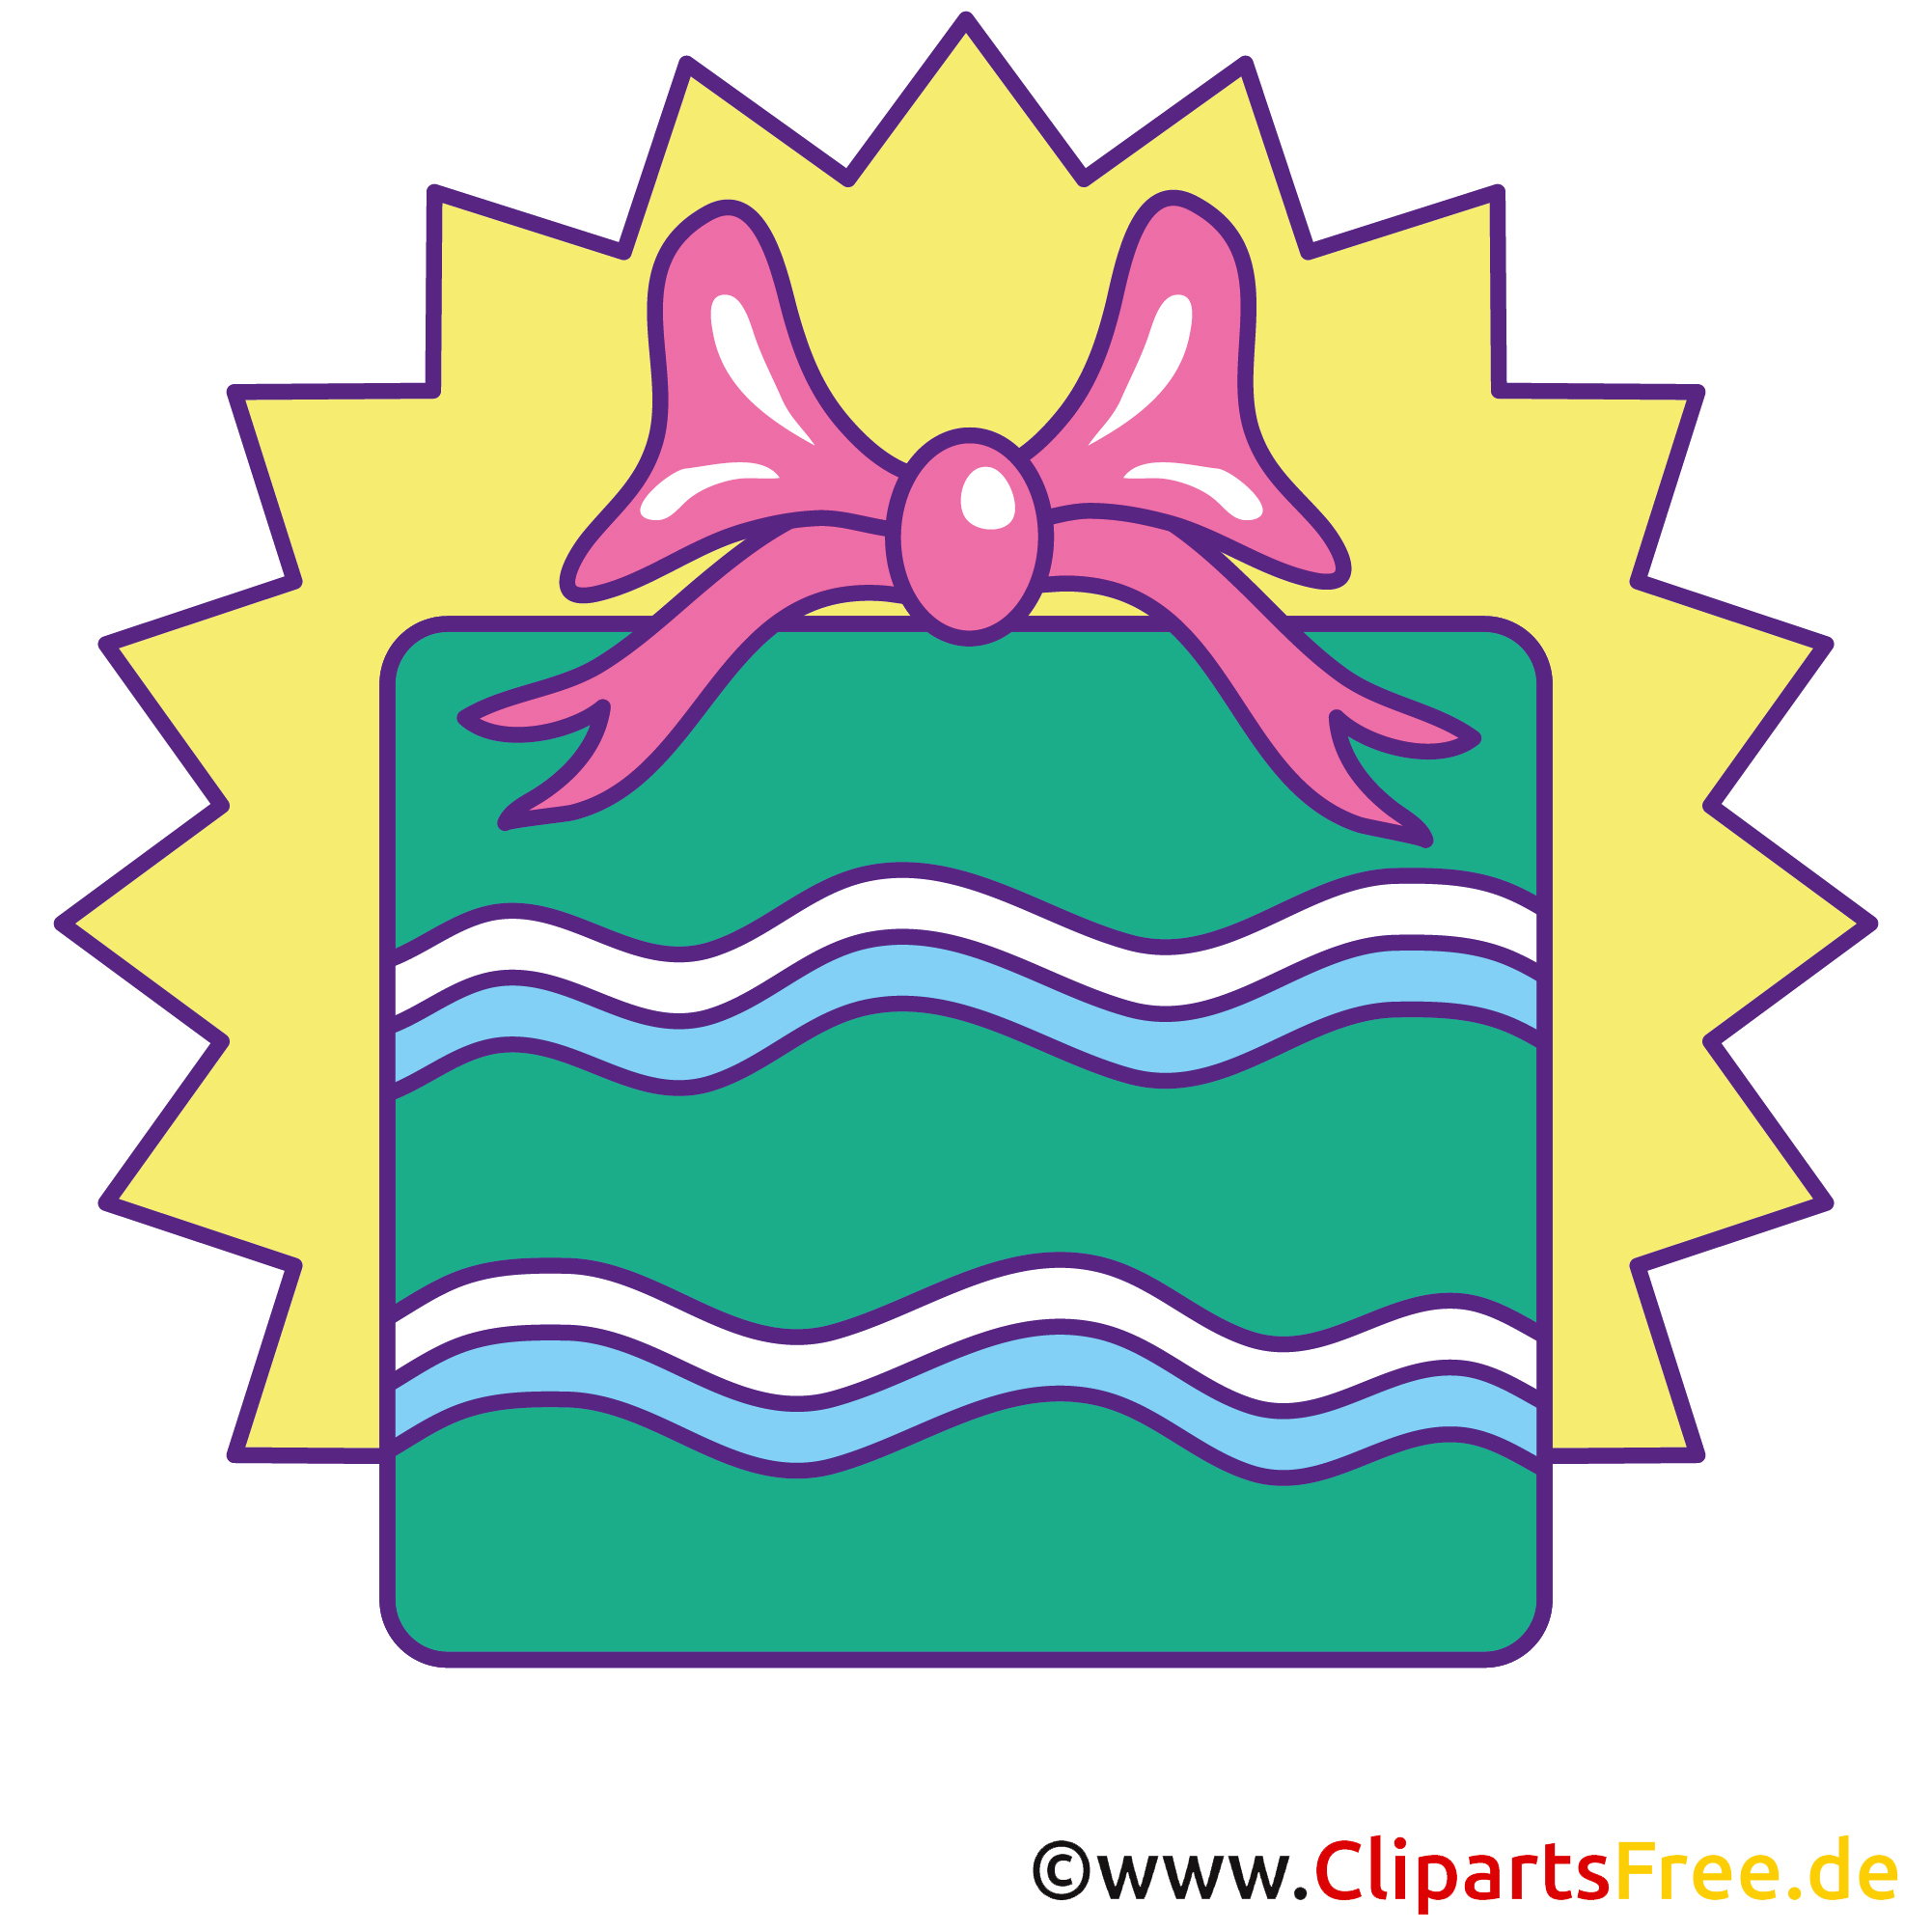 Clip Art download for Birthday Party